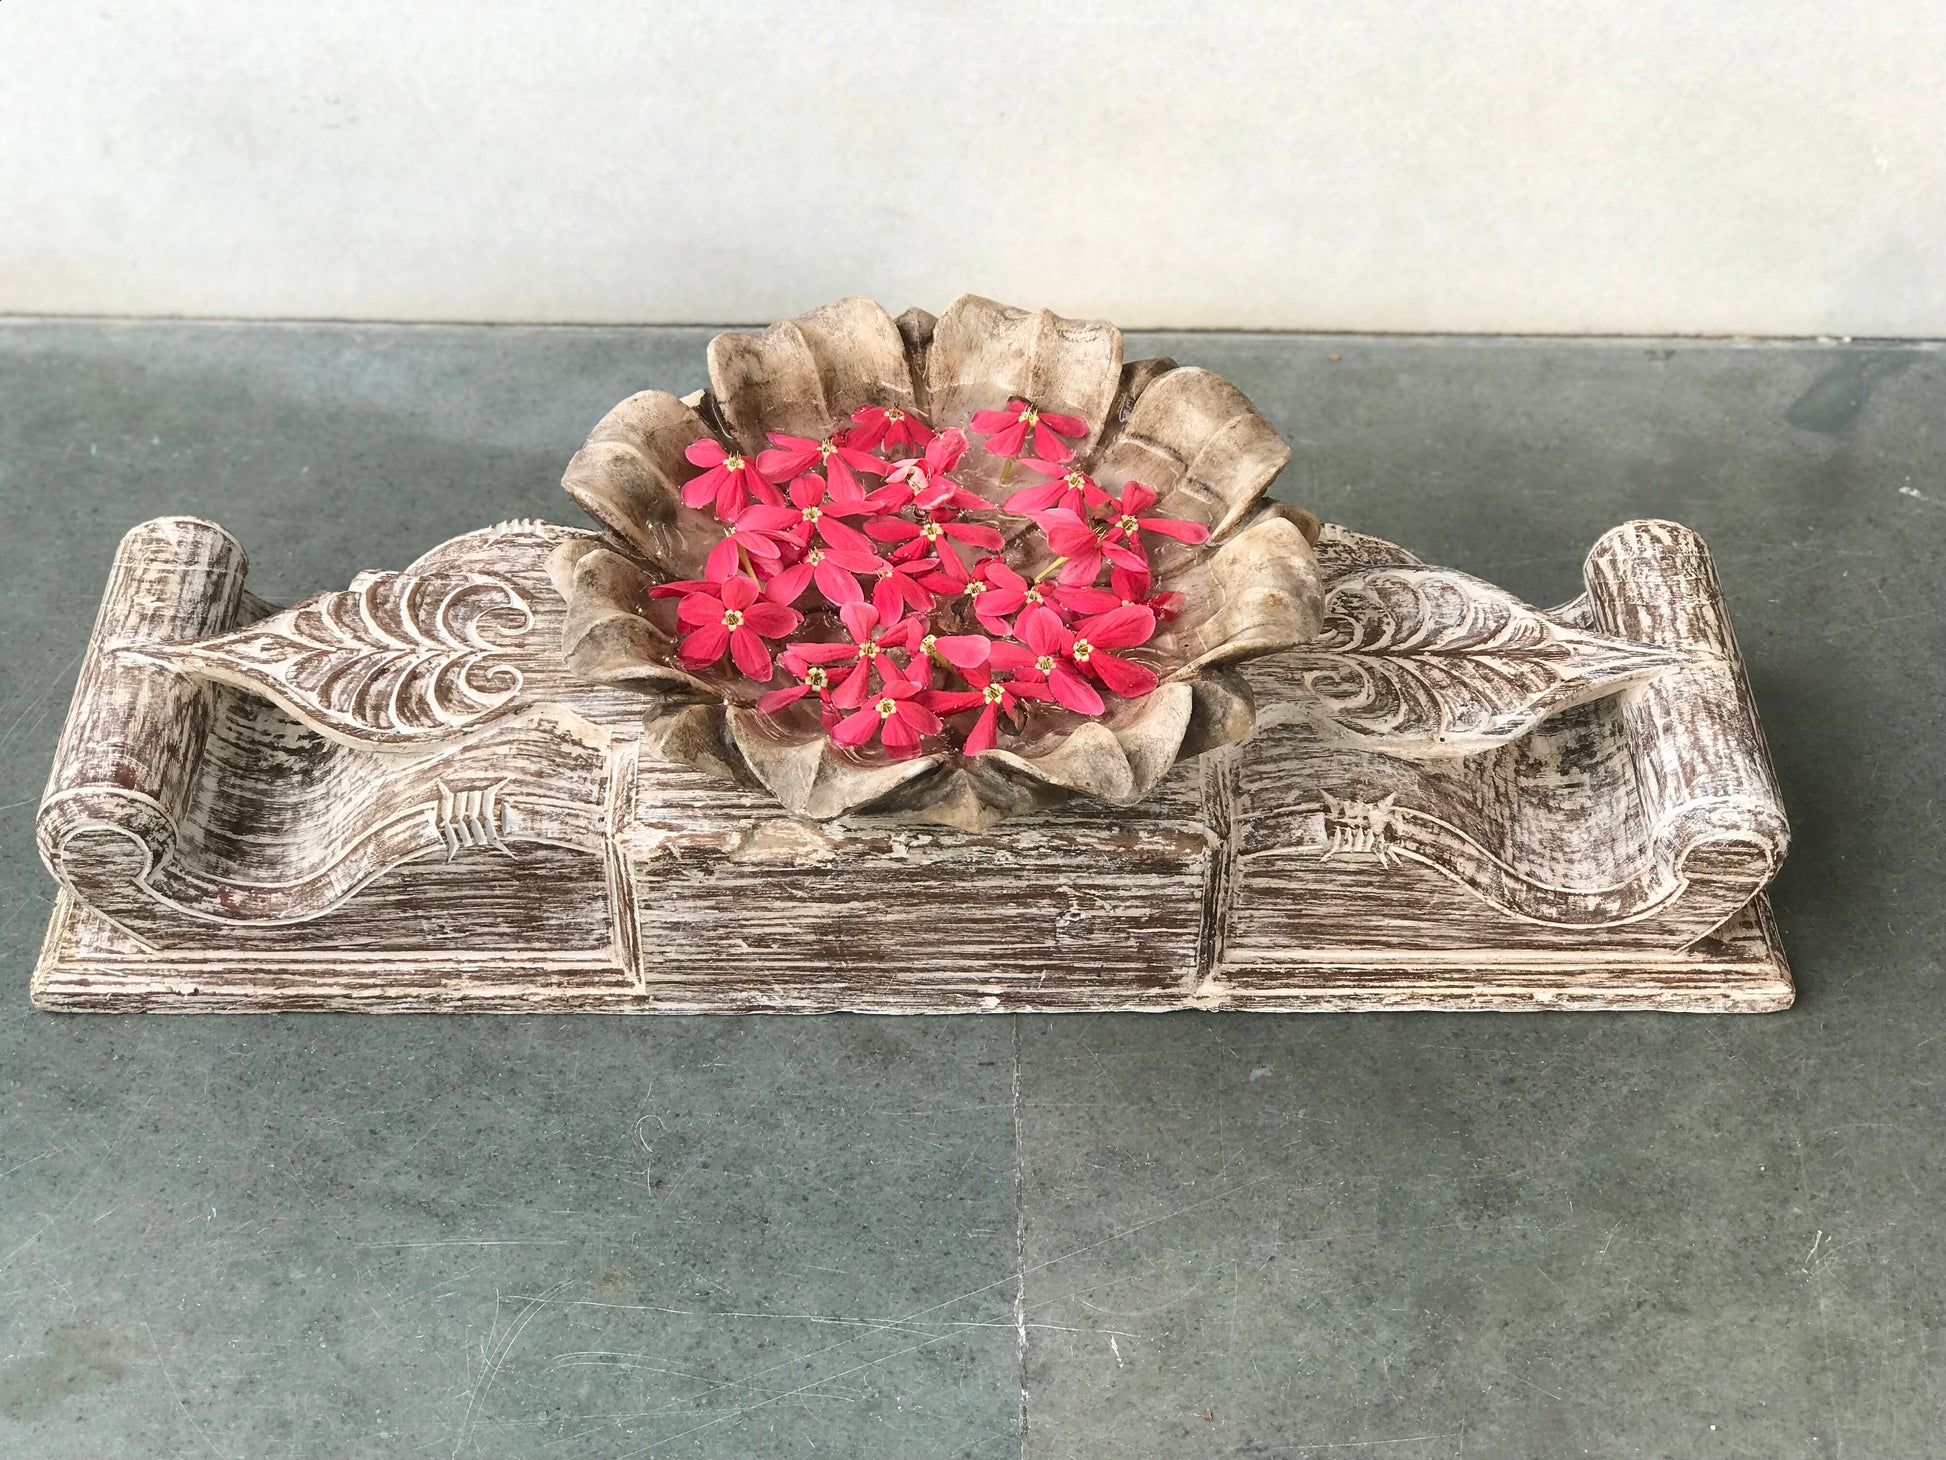 Image of Elegant and Traditional White Finish Base Bracket.  The Source India is an Indian Handicraft, Home Decor, Furnishing and Textiles Store. Based out of Hauz Khas Village New Delhi, each piece is carefully procured to allow the enhancement of India's Culture.